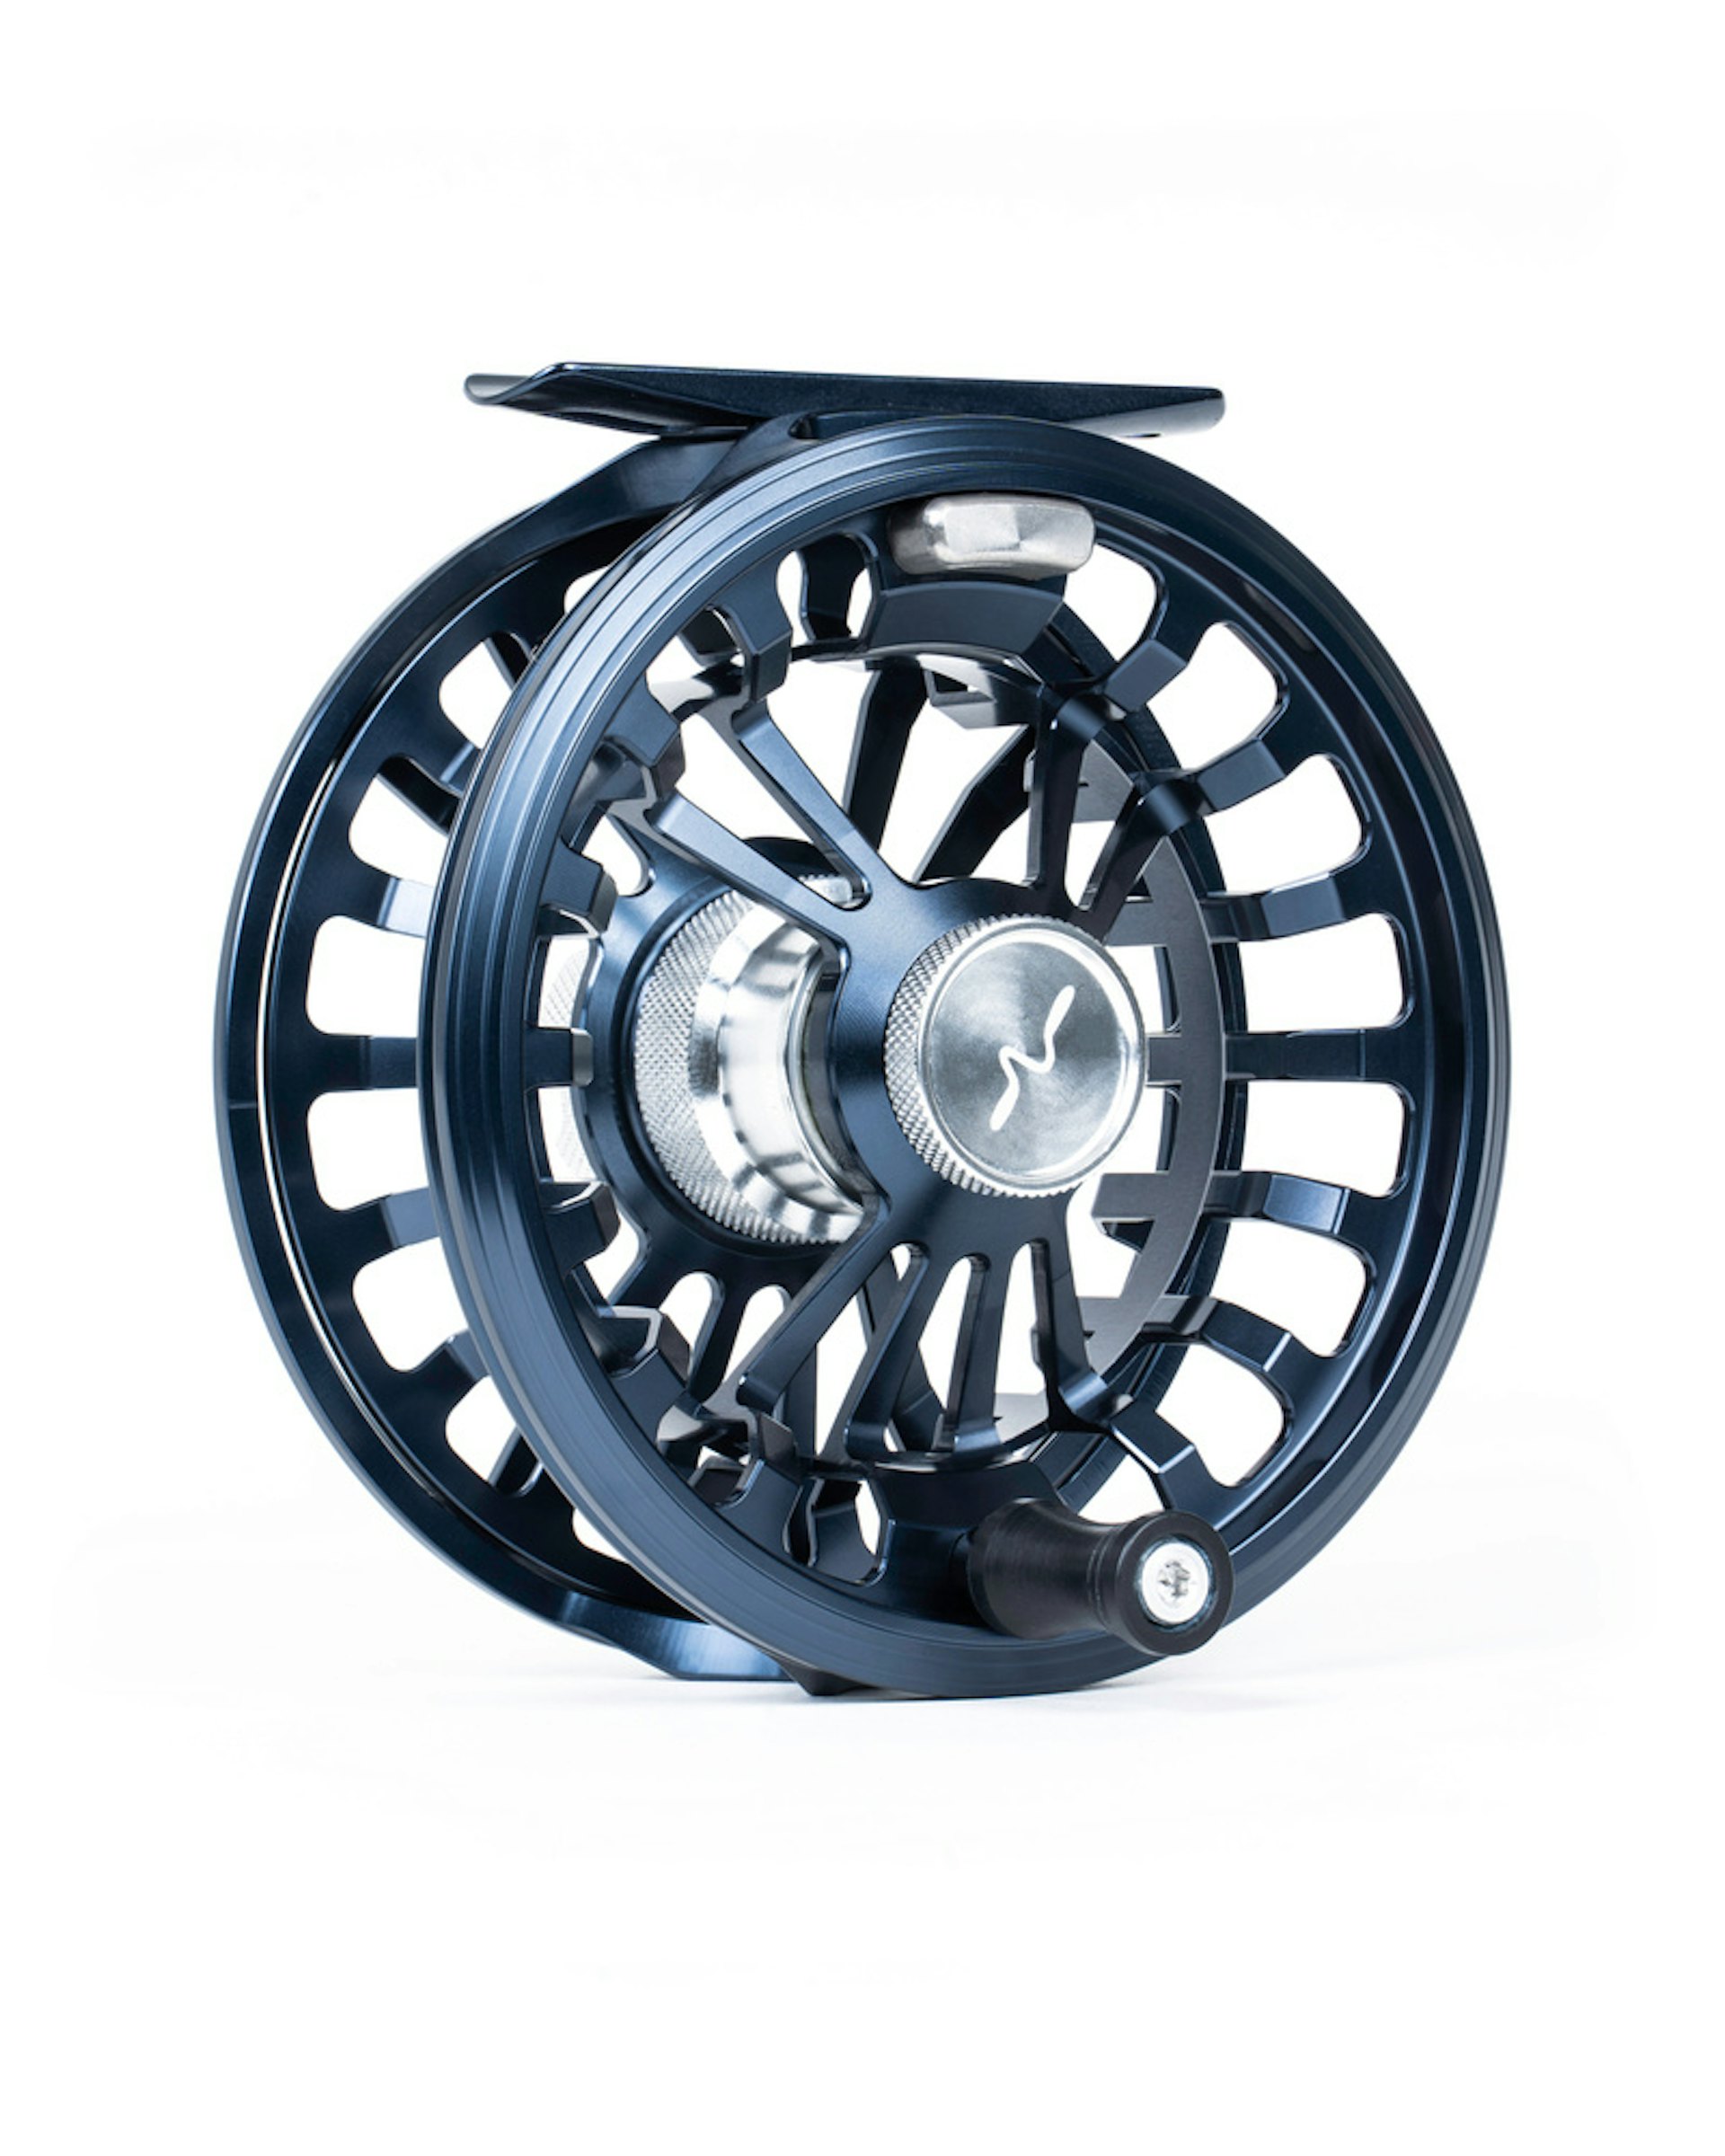 Guideline Halo - Fly reel